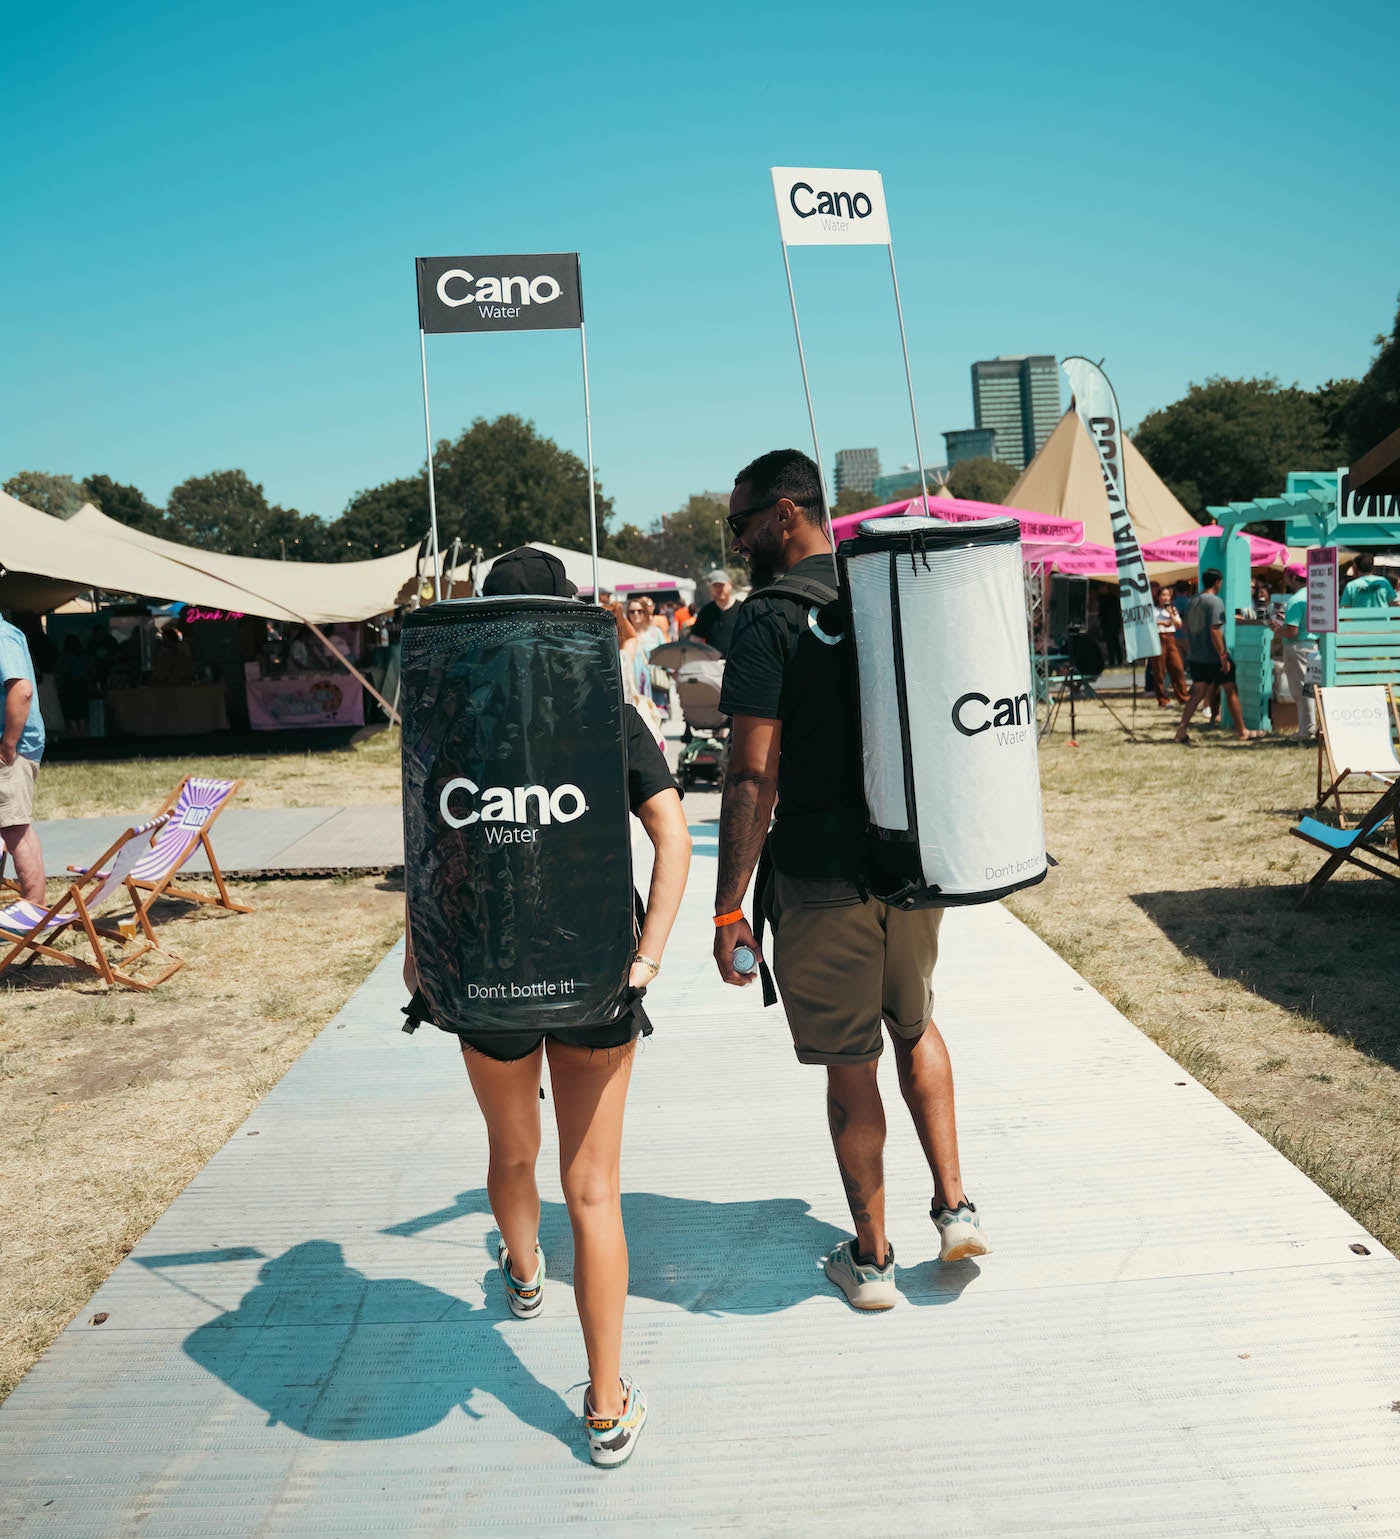 CANO Water drinks vending backpacks at a festival event